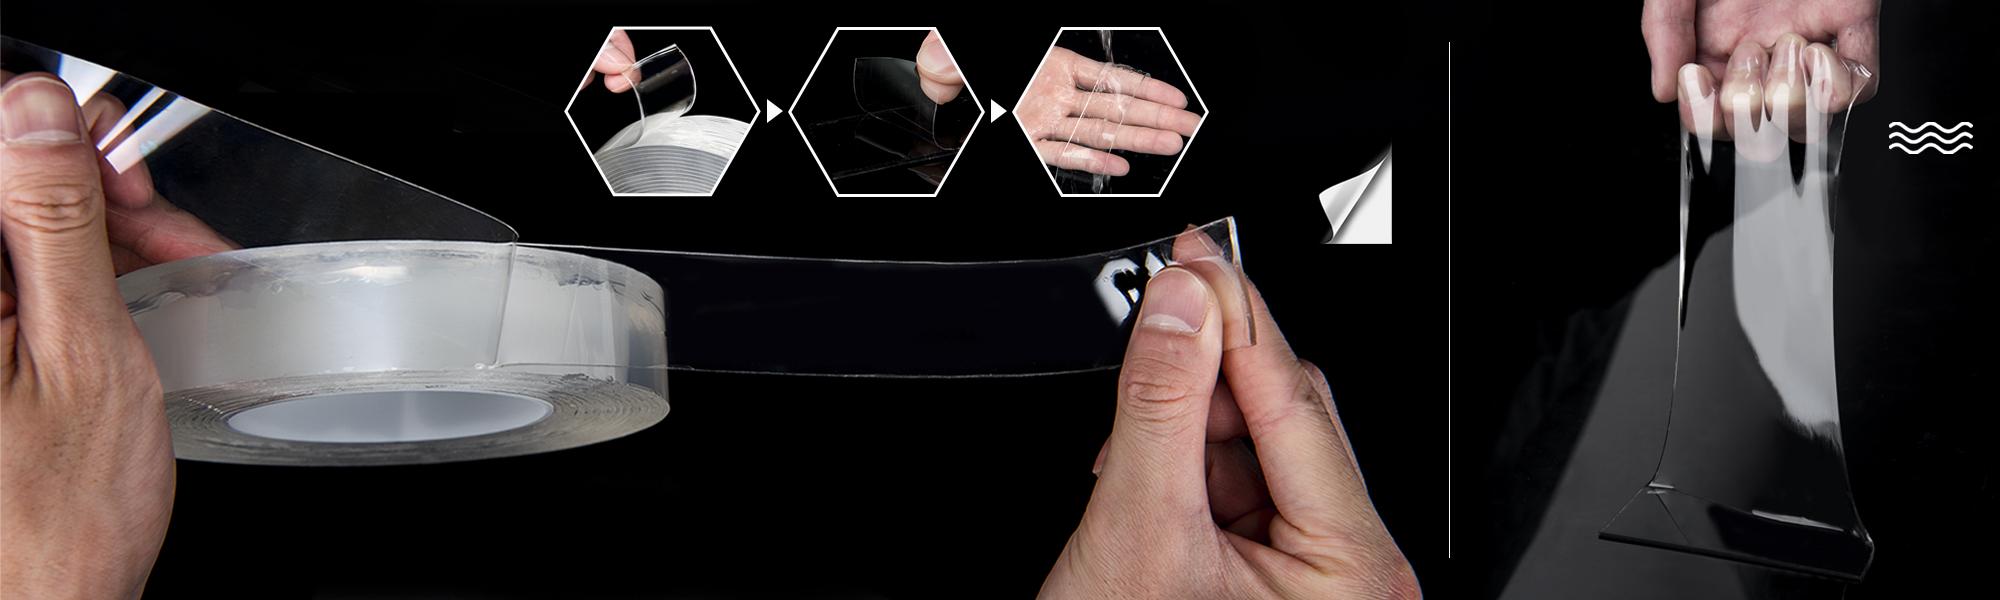 Stick with Innovation: Double-Sided Nano Tape for Every Need